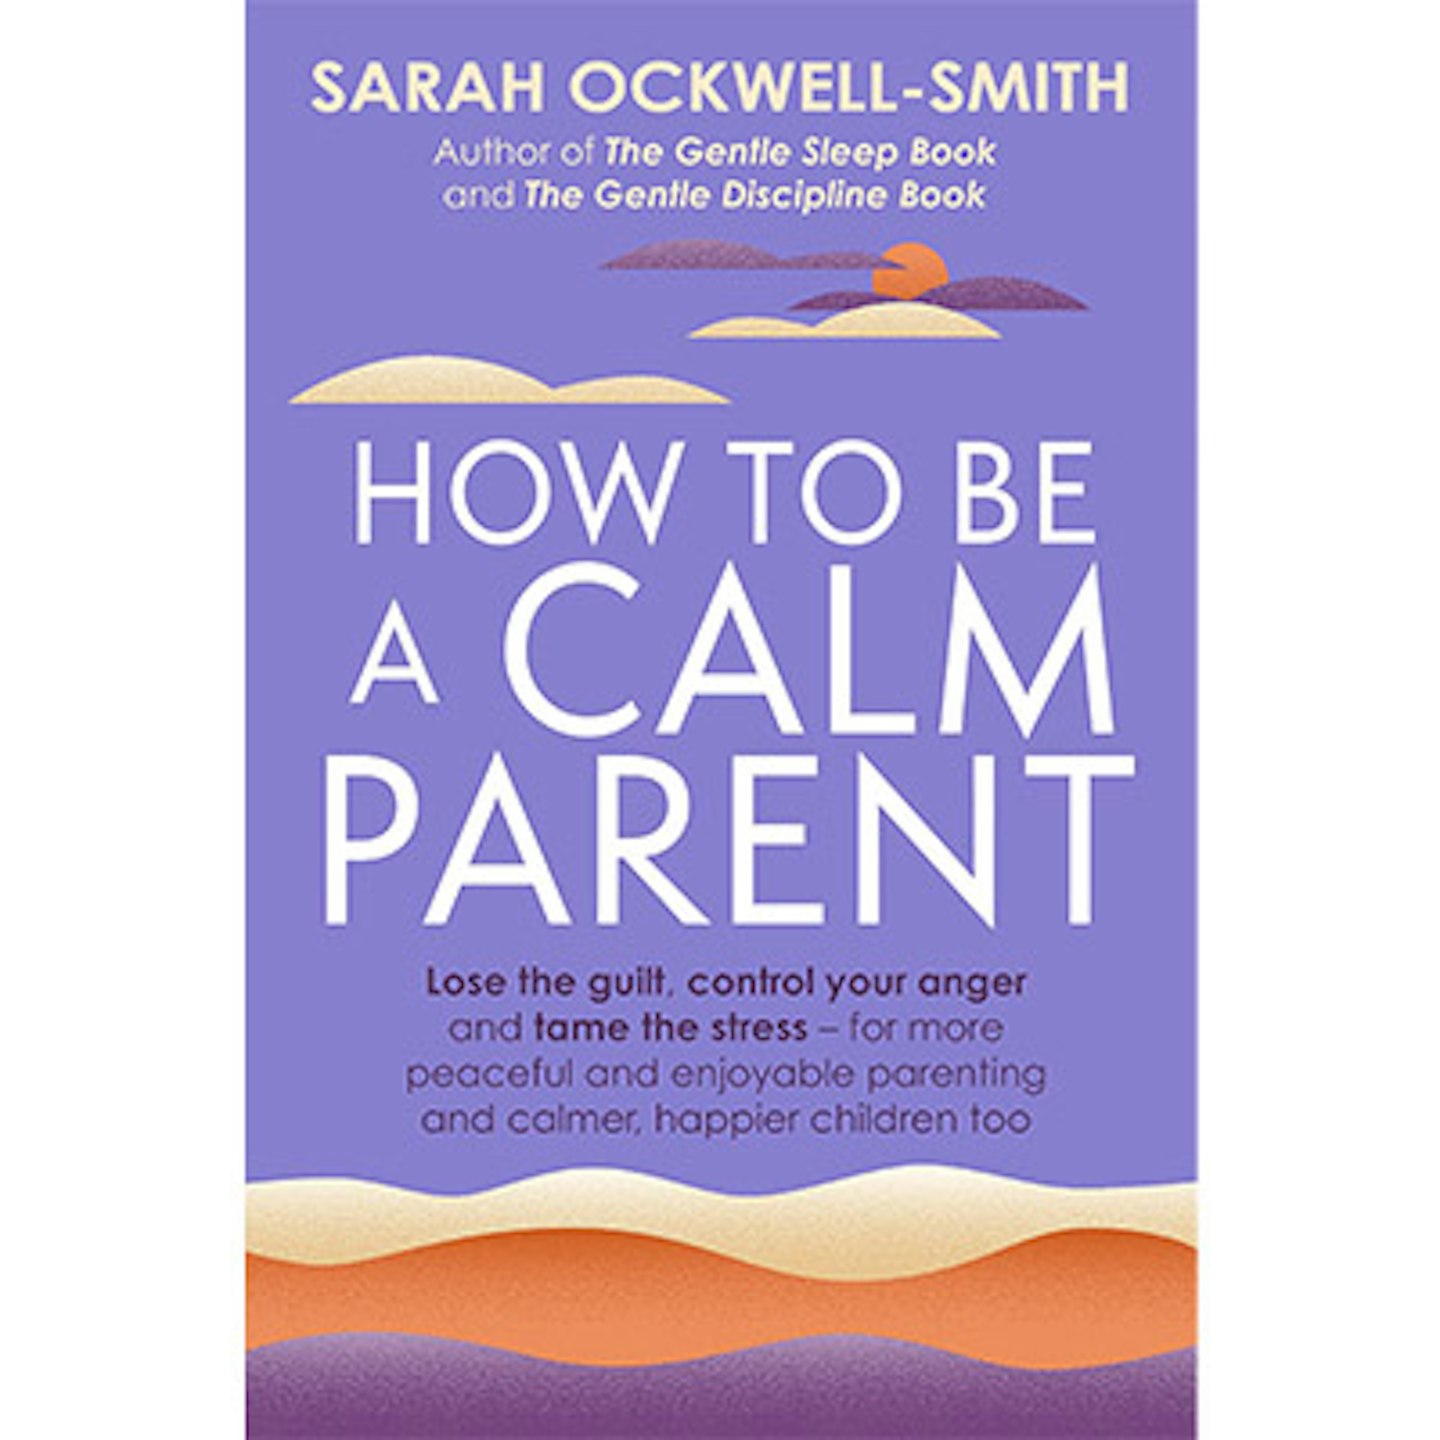 how to be a calm parent by sarah okwell-smith